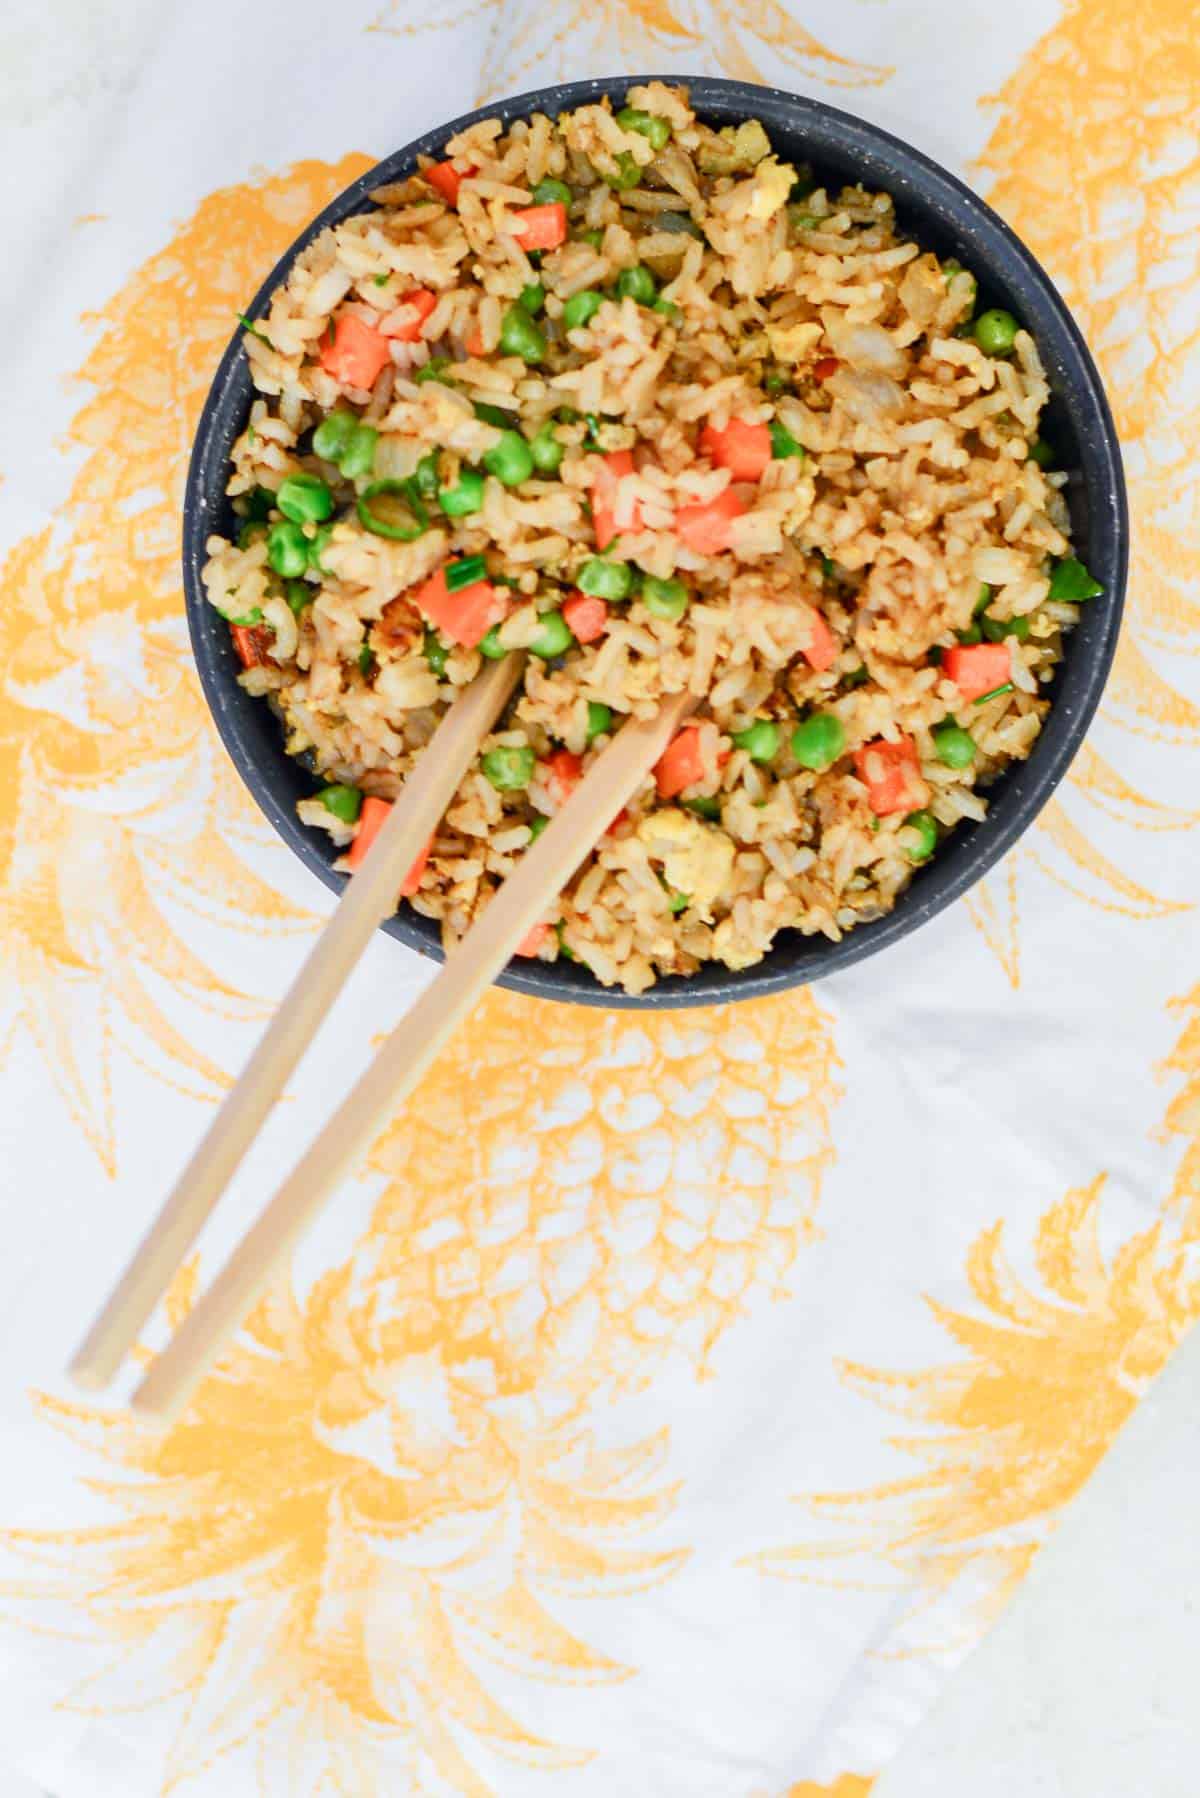 easy fried rice recipe served in a black owl with chopsticks